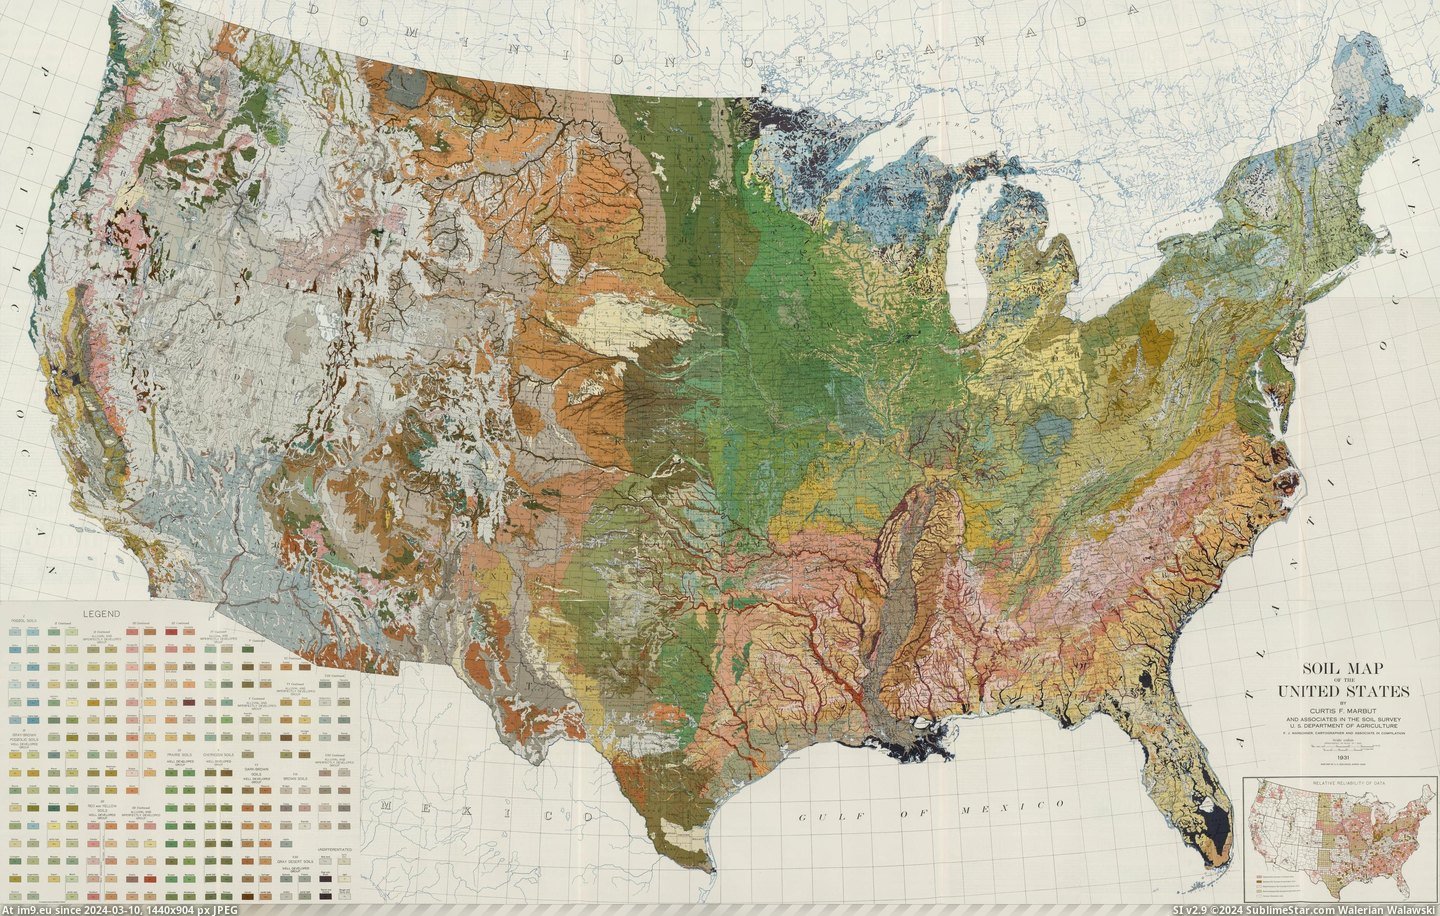 #Map #American #Atlas #Soil #Agriculture #States #United [Mapporn] Soil Map of the United States, from the Atlas of American Agriculture (1931) [3686x2327] Pic. (Image of album My r/MAPS favs))